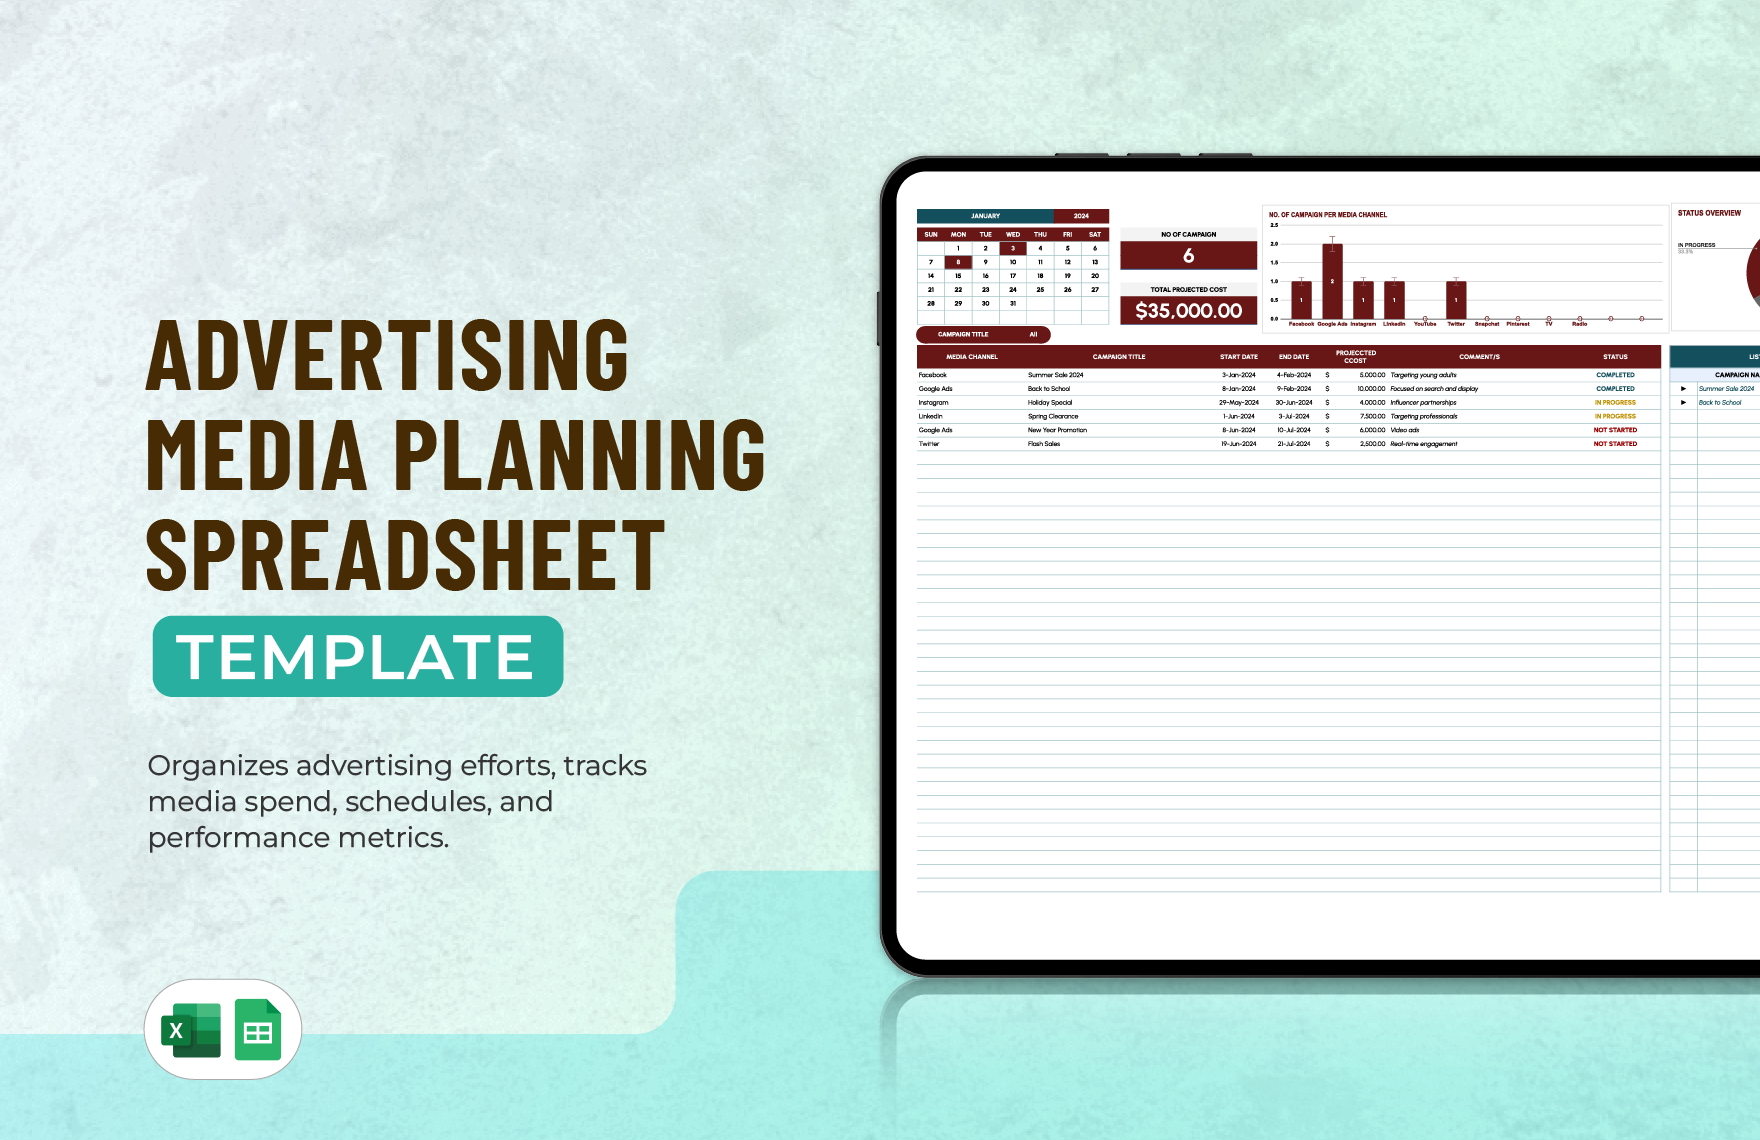 Advertising Media Planning Spreadsheet Template in Excel, Google Sheets